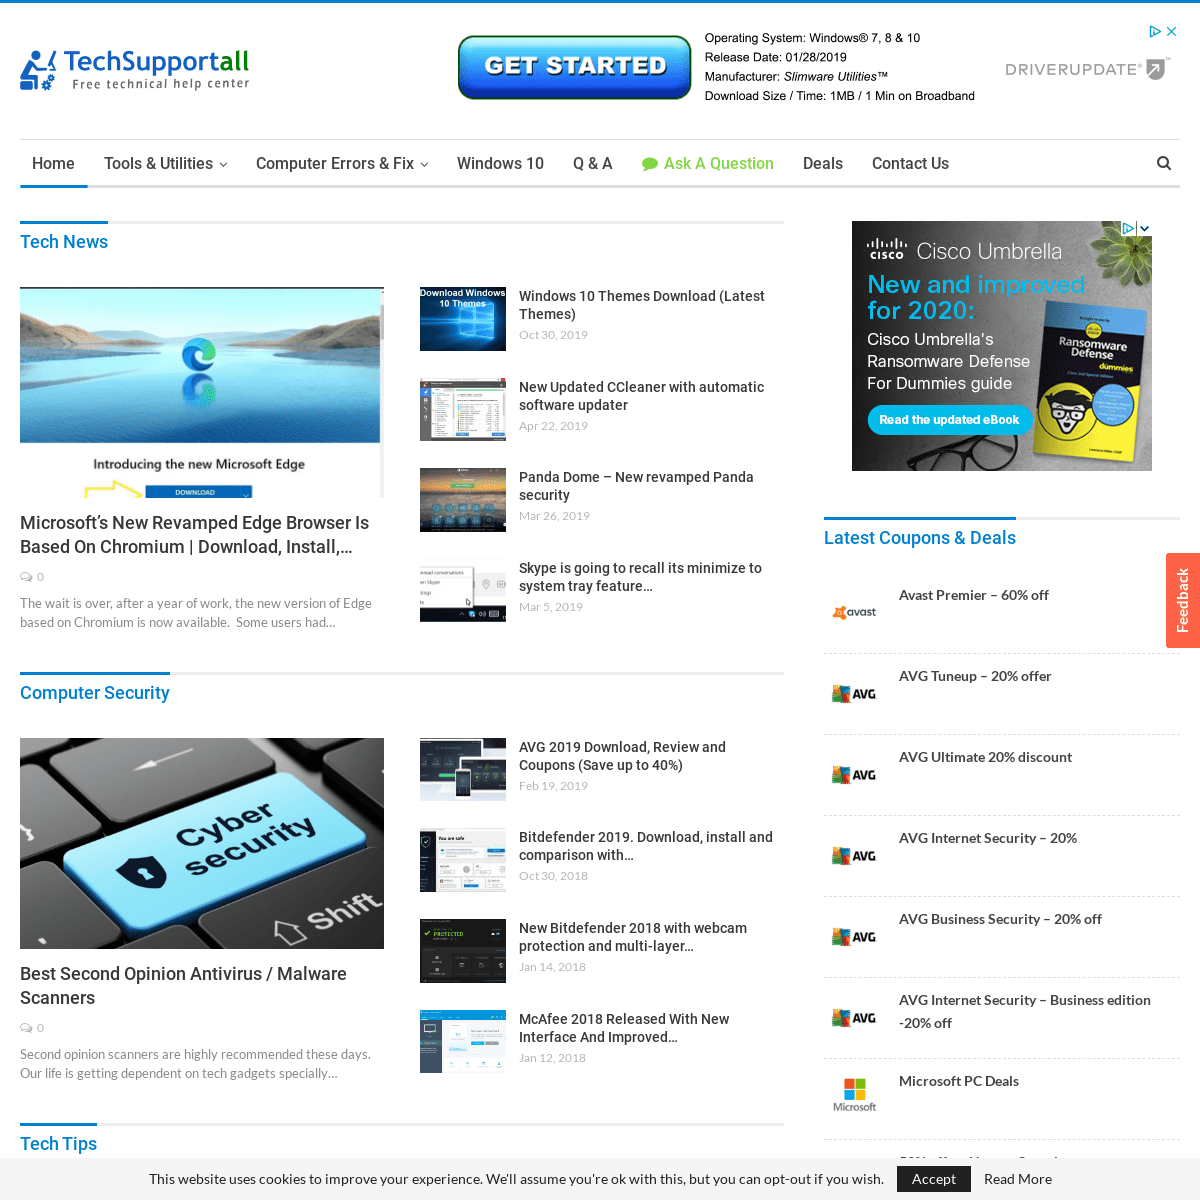 A complete backup of techsupportall.com